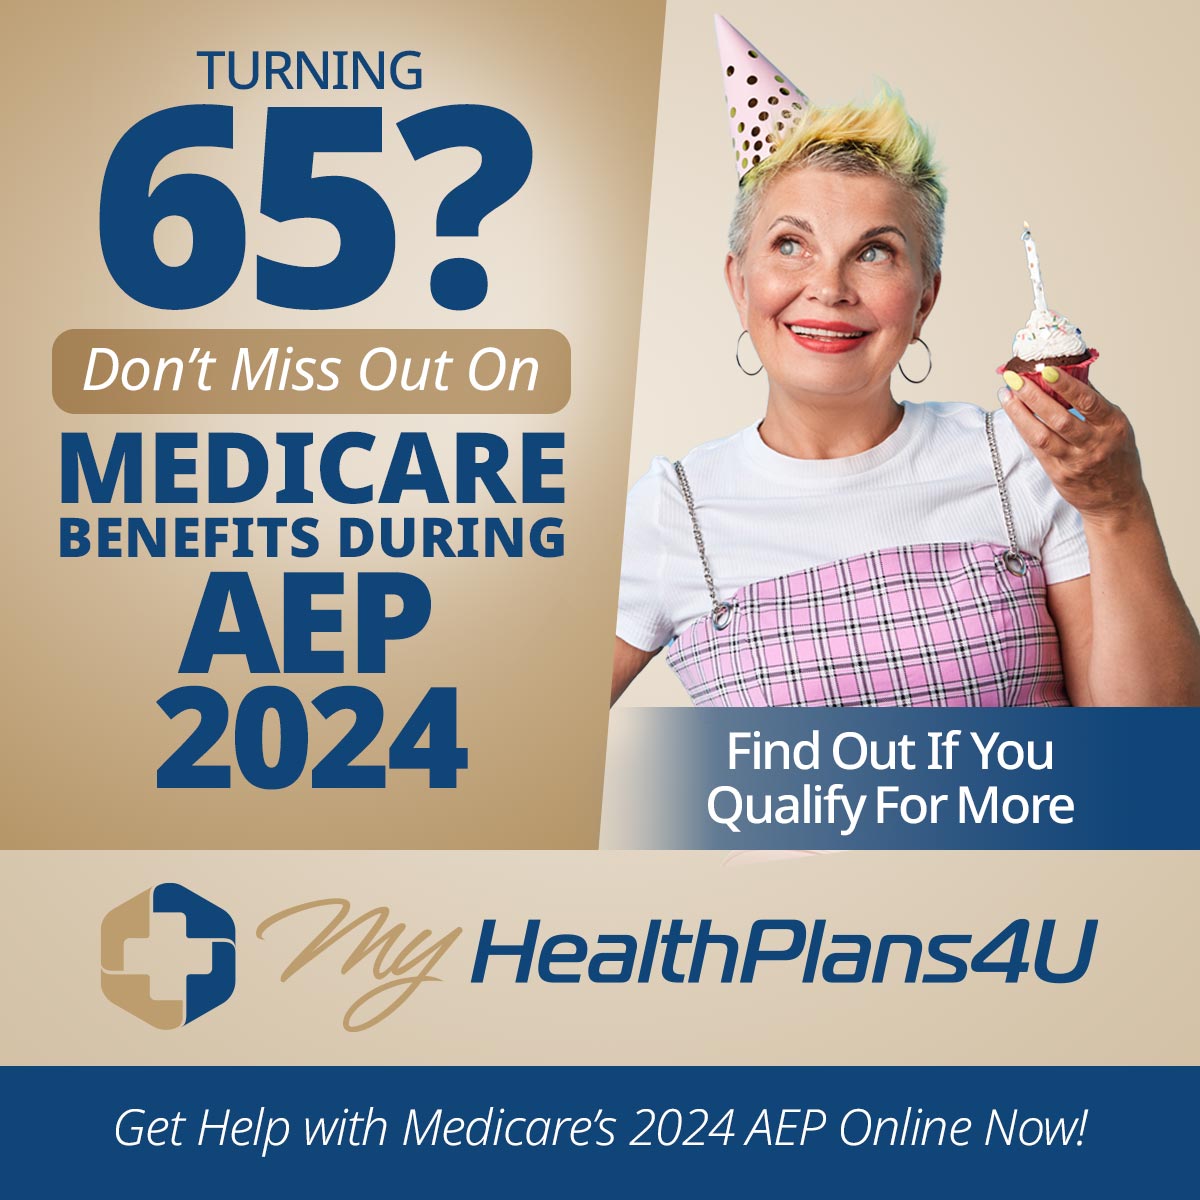 Turning 65? Don't miss out on Medicare benefits during AEP 2024. My Health Plans 4 U.